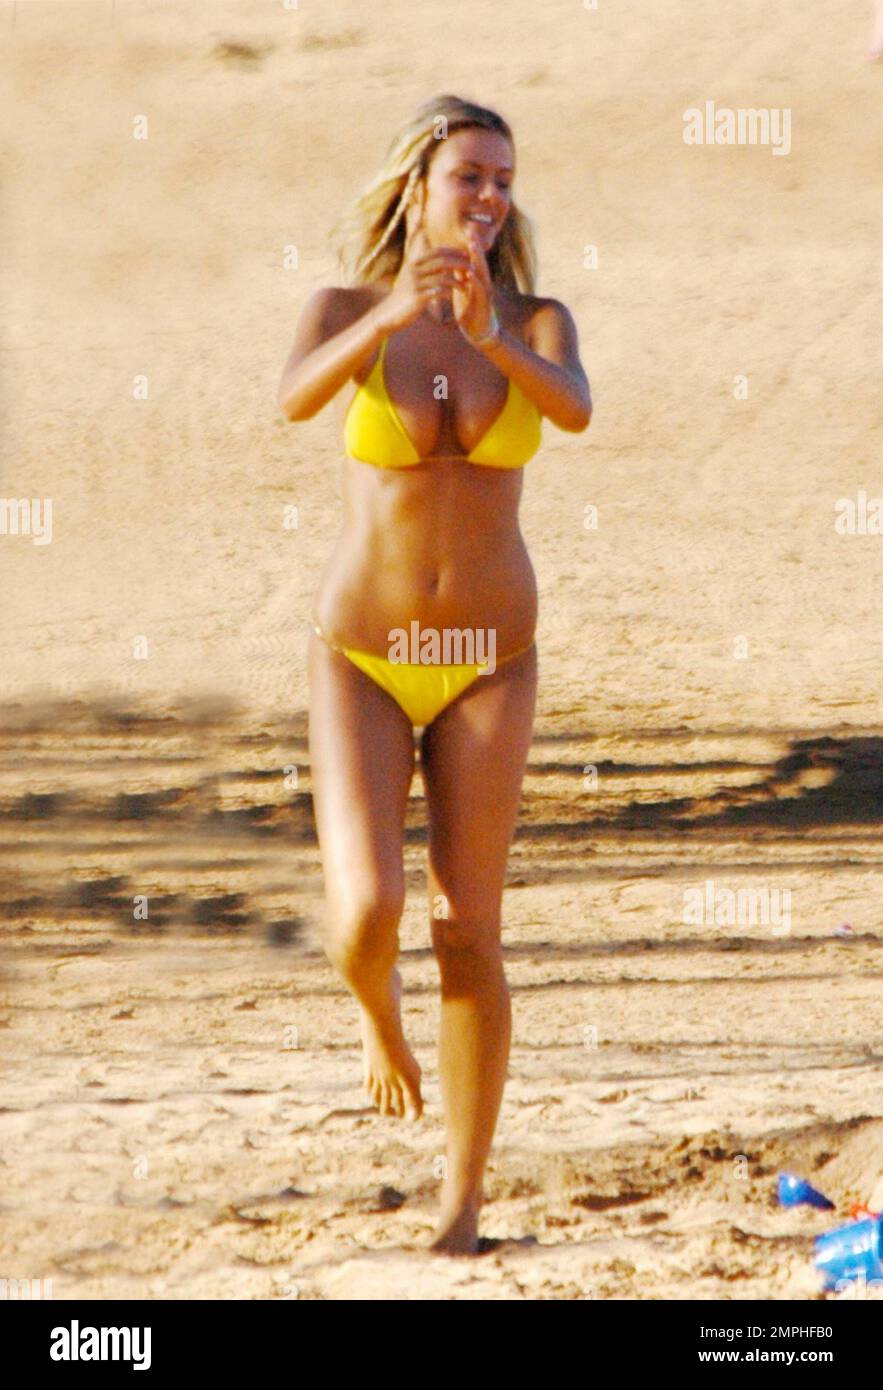 2010 "Sports Illustrated" Swimsuit Edition cover model Brooklyn Decker  wears a yellow bikini while she frolics on the beach during filming her new  film "Just Go With It." The film also stars